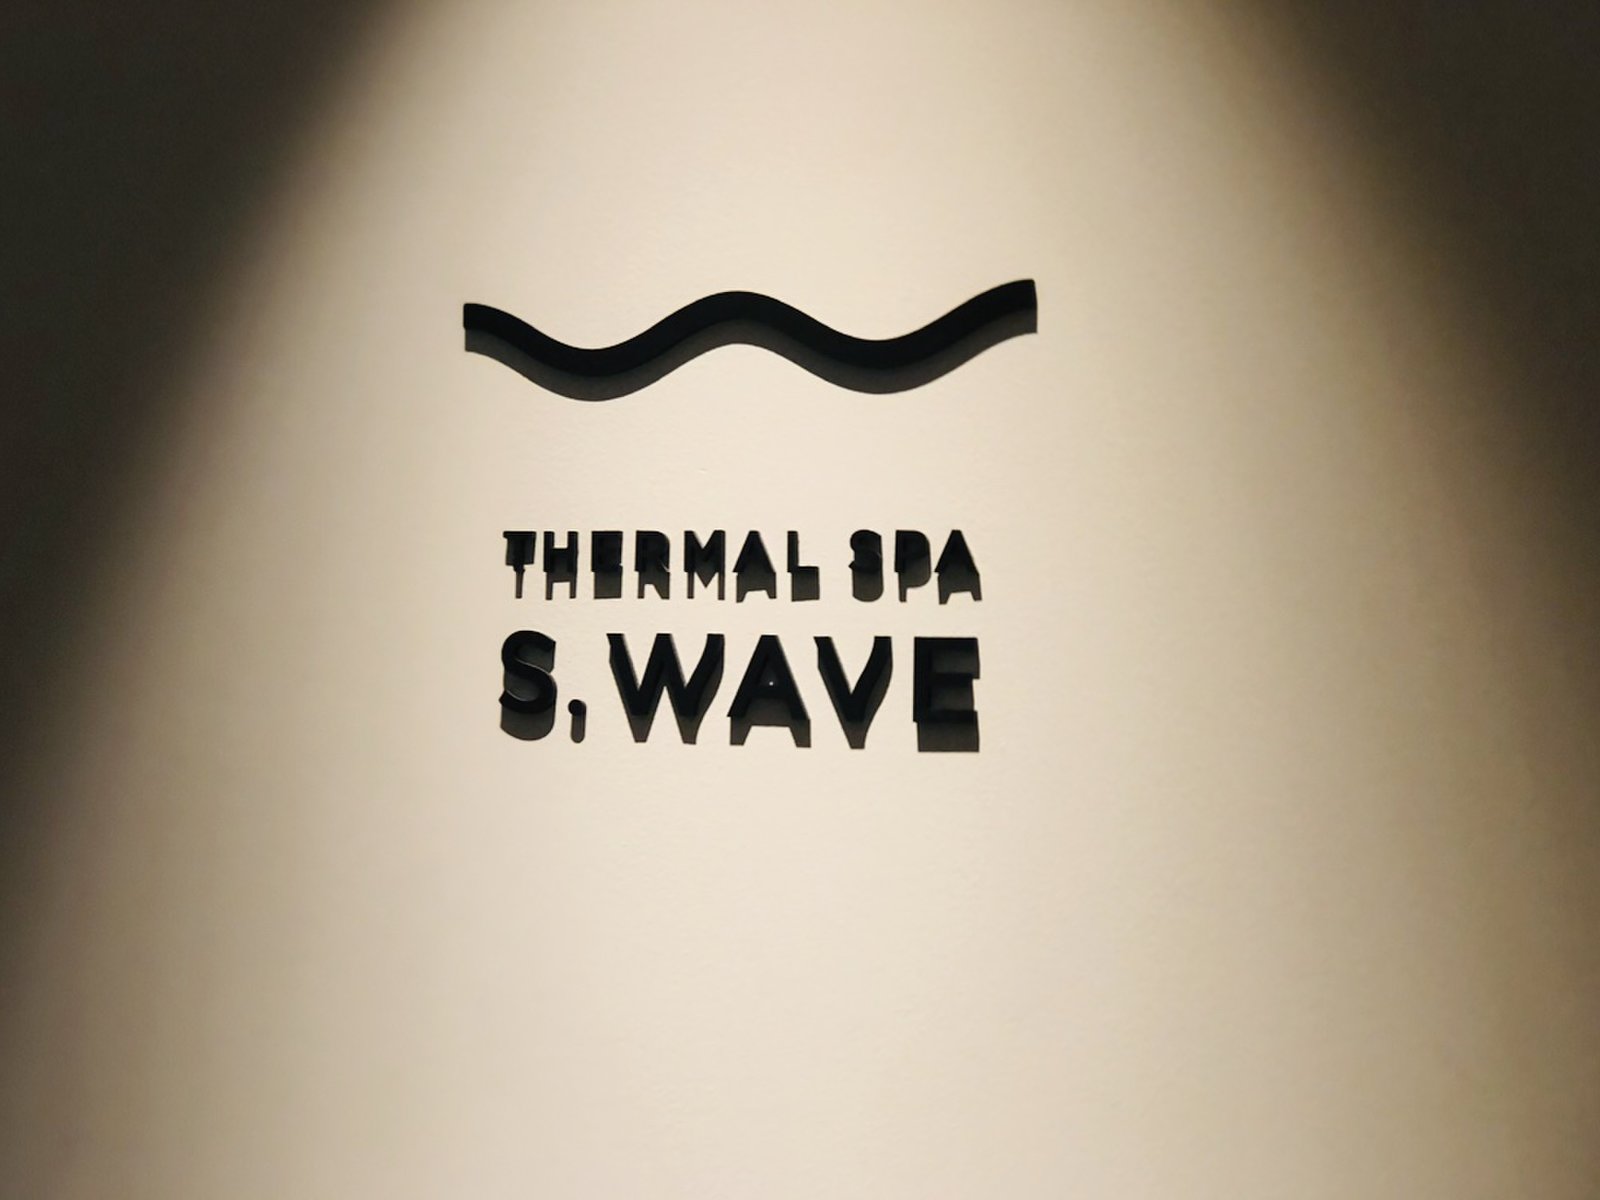 THERMAL SPA S.WAVE